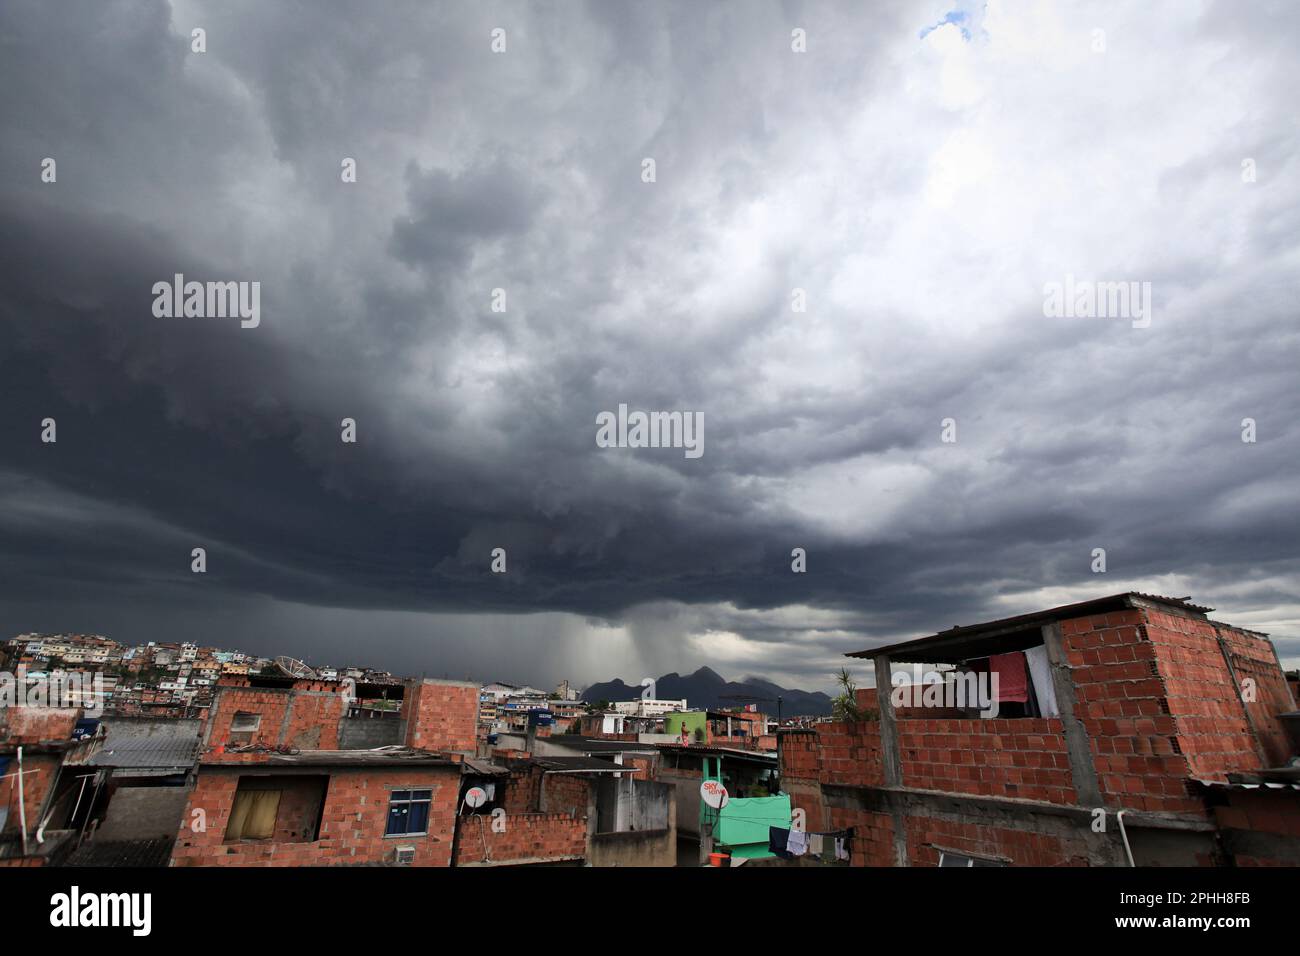 Baixa do Sapateiro, one of the communities forming Favela da Maré, one of the largest slum complexes in Rio de Janeiro, a consequence of the low indicators of social development that characterize the north region of the city. Stock Photo